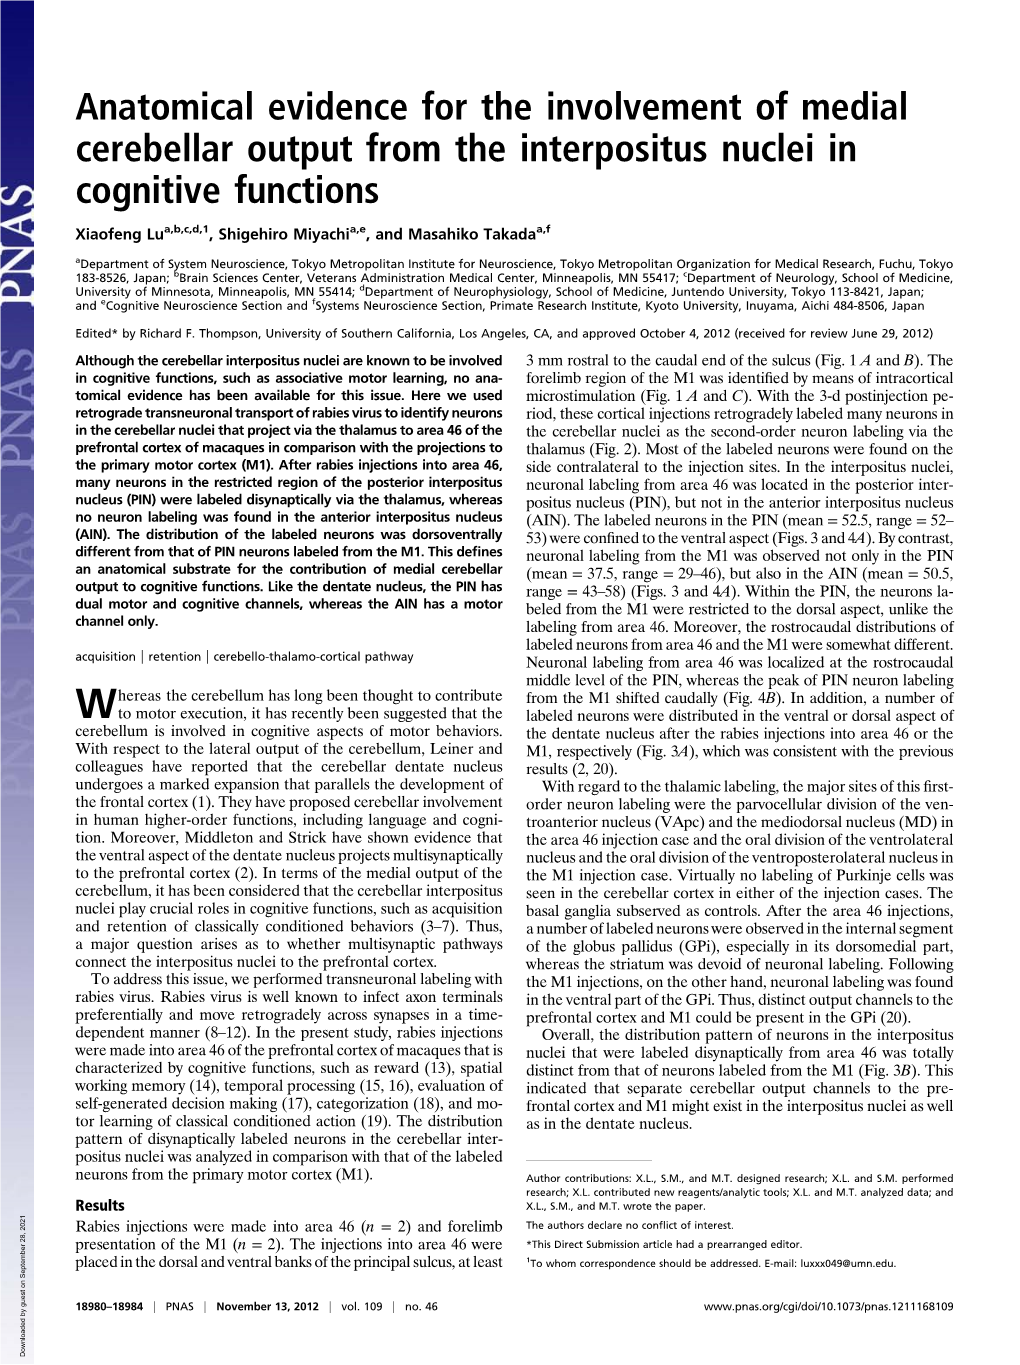 Anatomical Evidence for the Involvement of Medial Cerebellar Output from the Interpositus Nuclei in Cognitive Functions